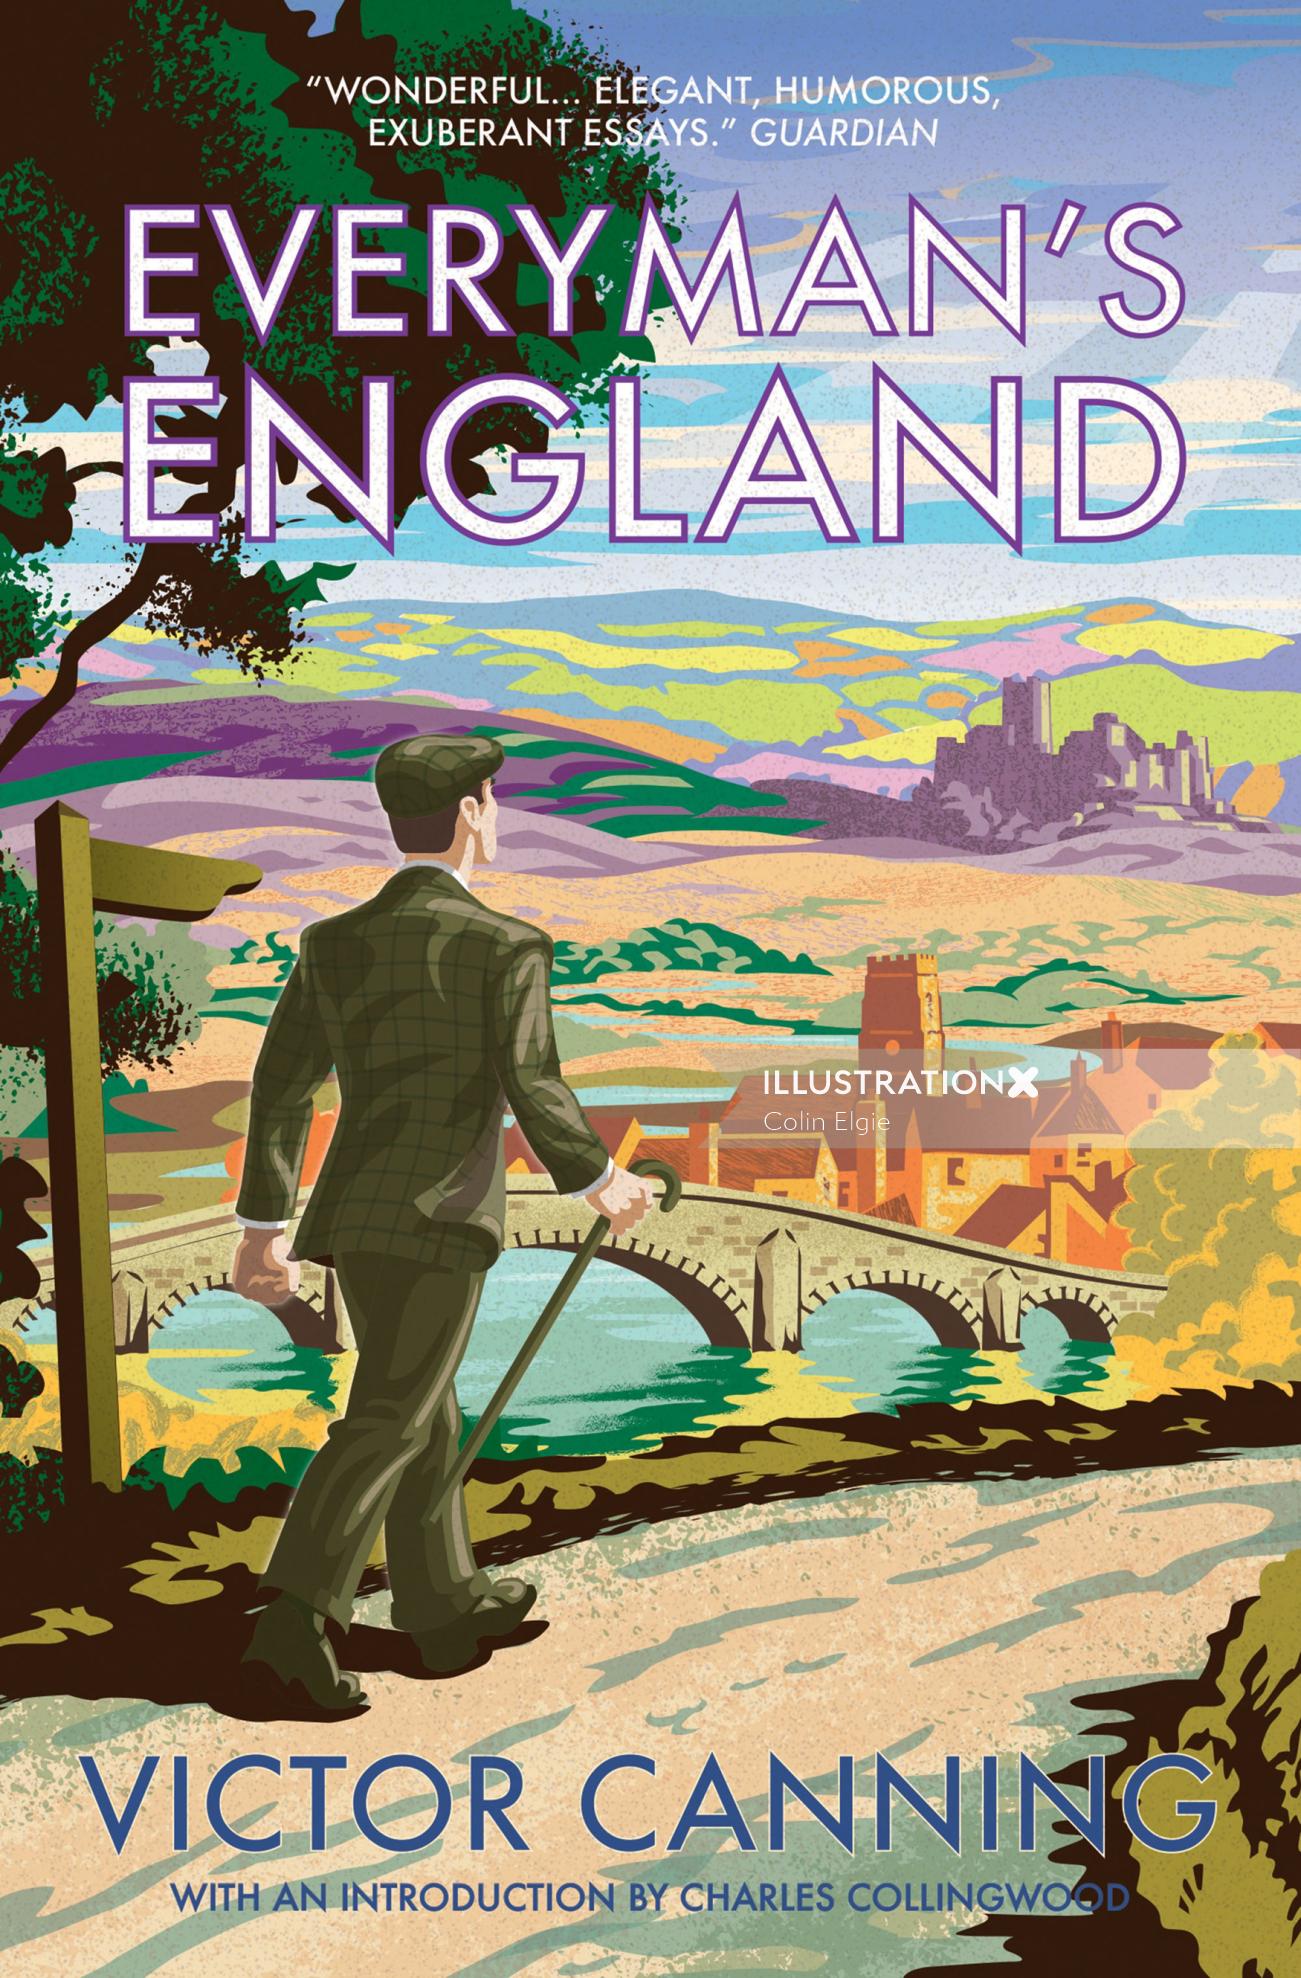 Retro inspired bookcover design showing a man striding down a country lane amidst a bucolic landscap